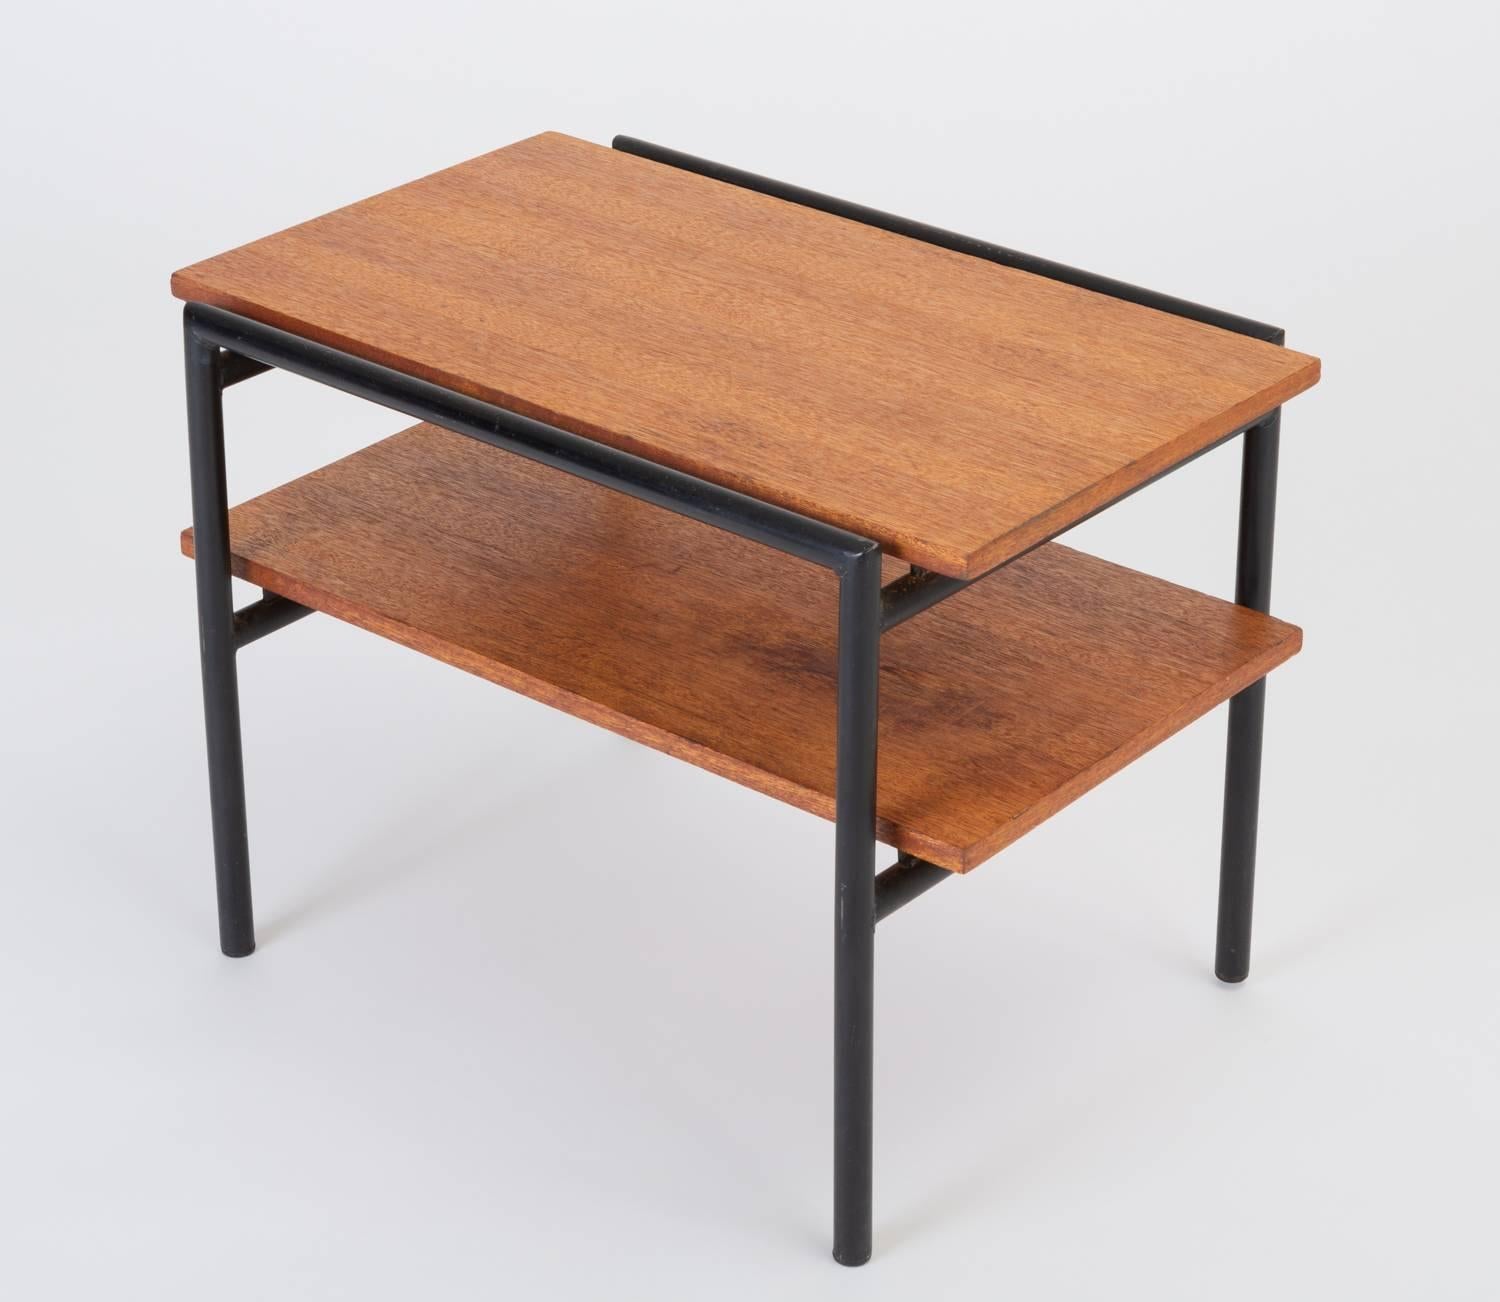 Don Knorr’s model 2254 side table was designed for Vista of California as part of a larger collection featuring the brand’s signature tubular framing of black-painted steel. The side or end table has two shelves of solid mahogany. The tubular frame